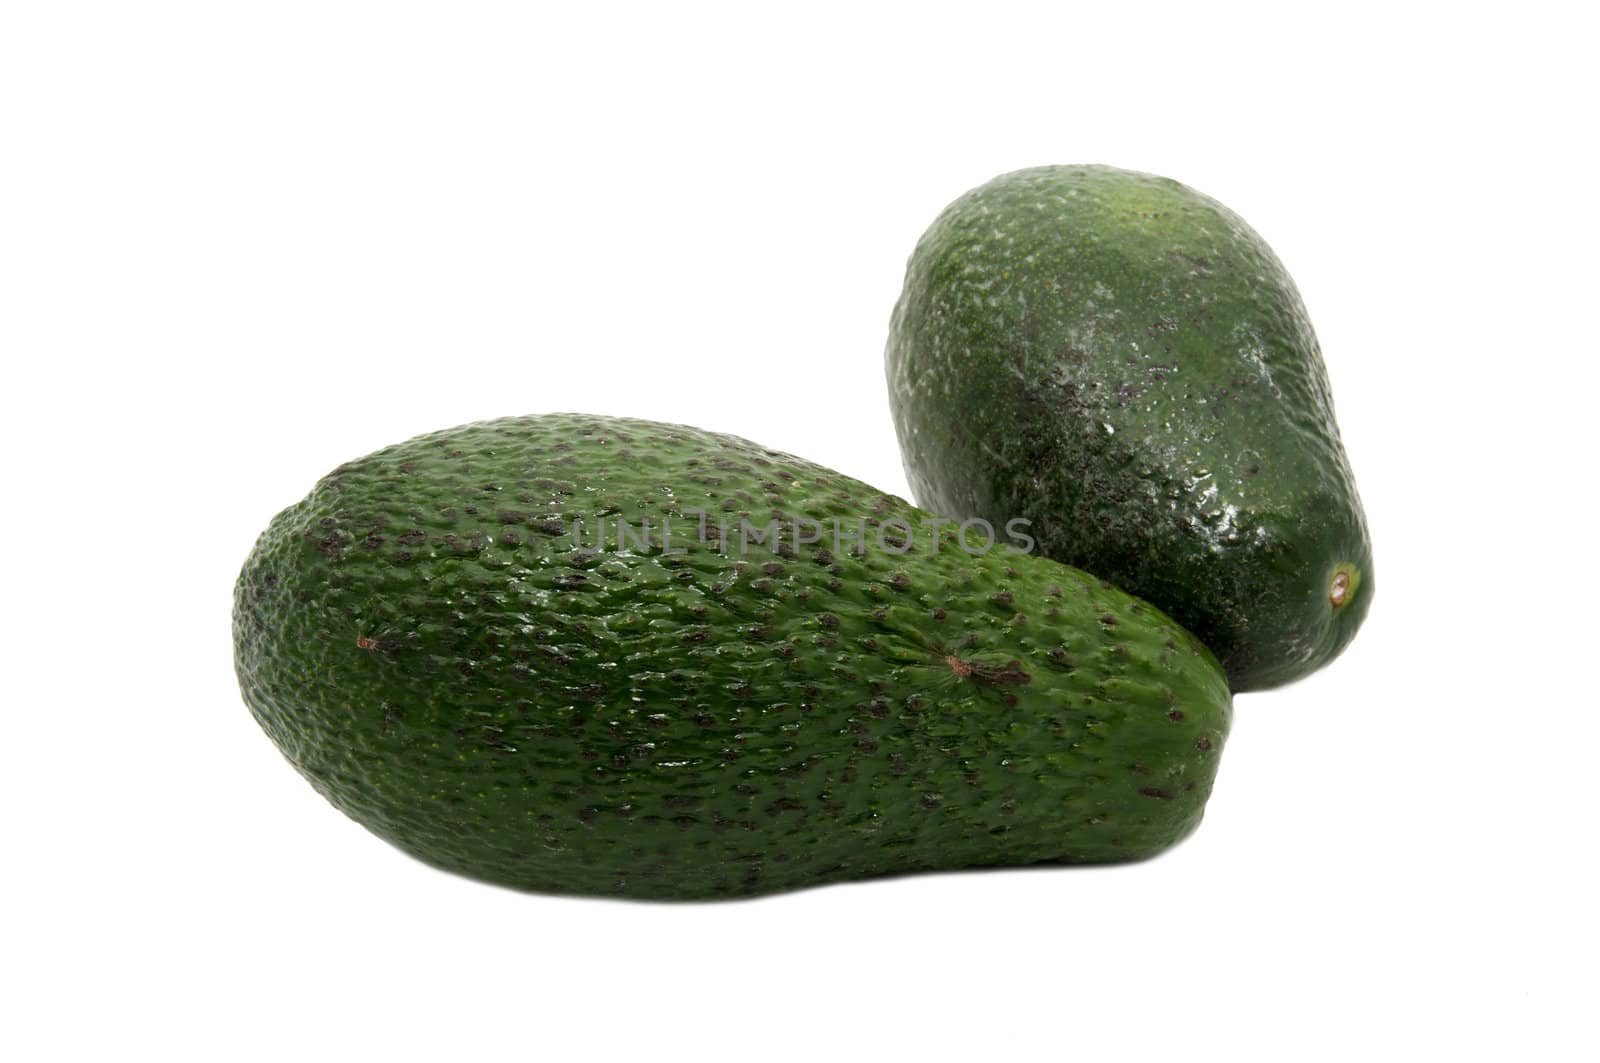 two pieces of fruit ripe avocado on a white background